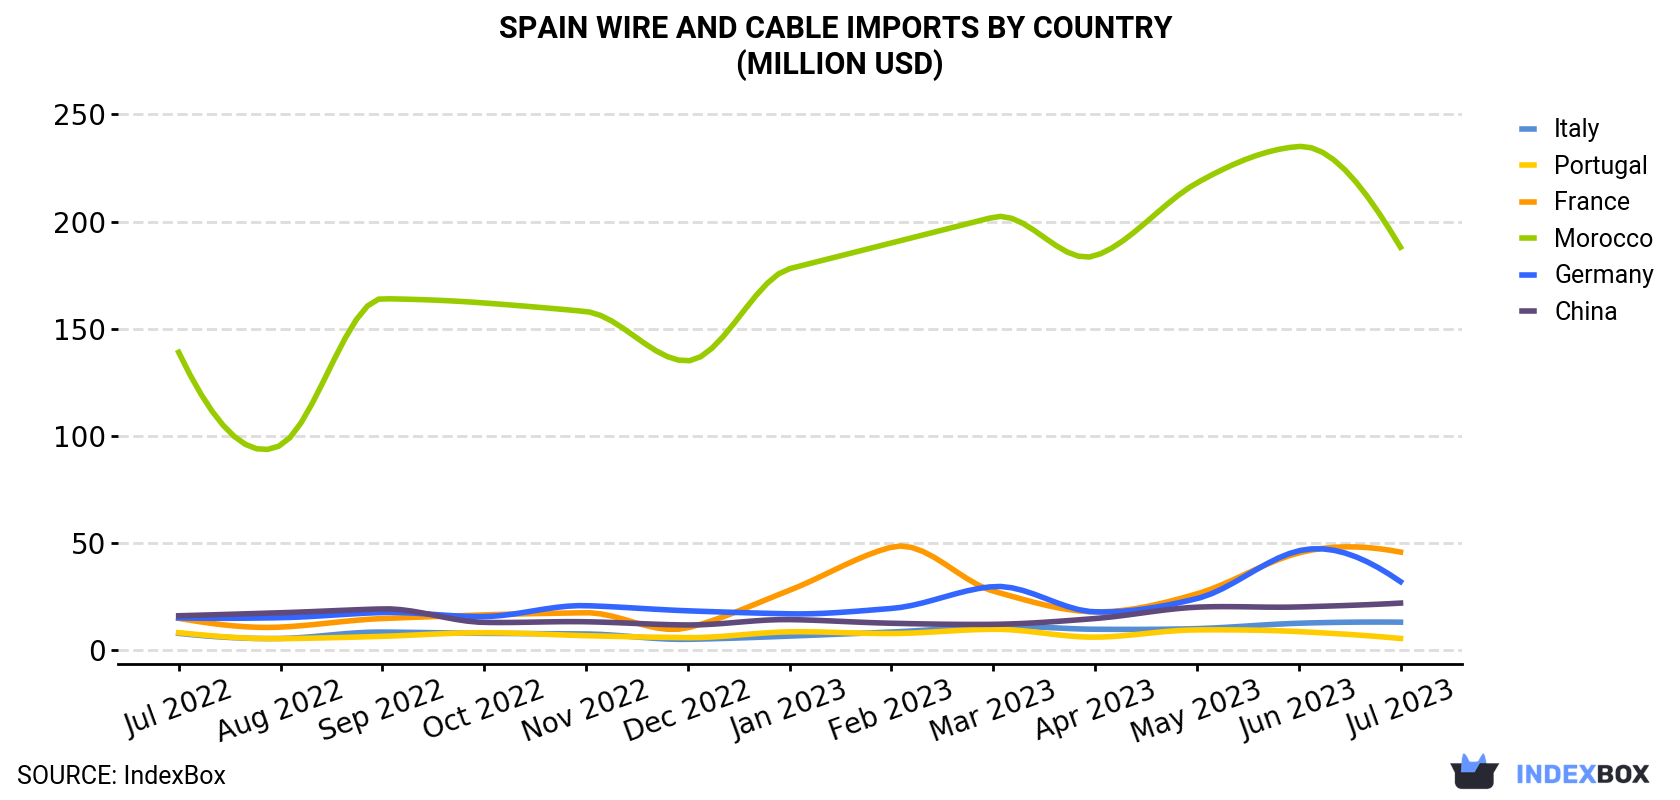 Spain Wire And Cable Imports By Country (Million USD)